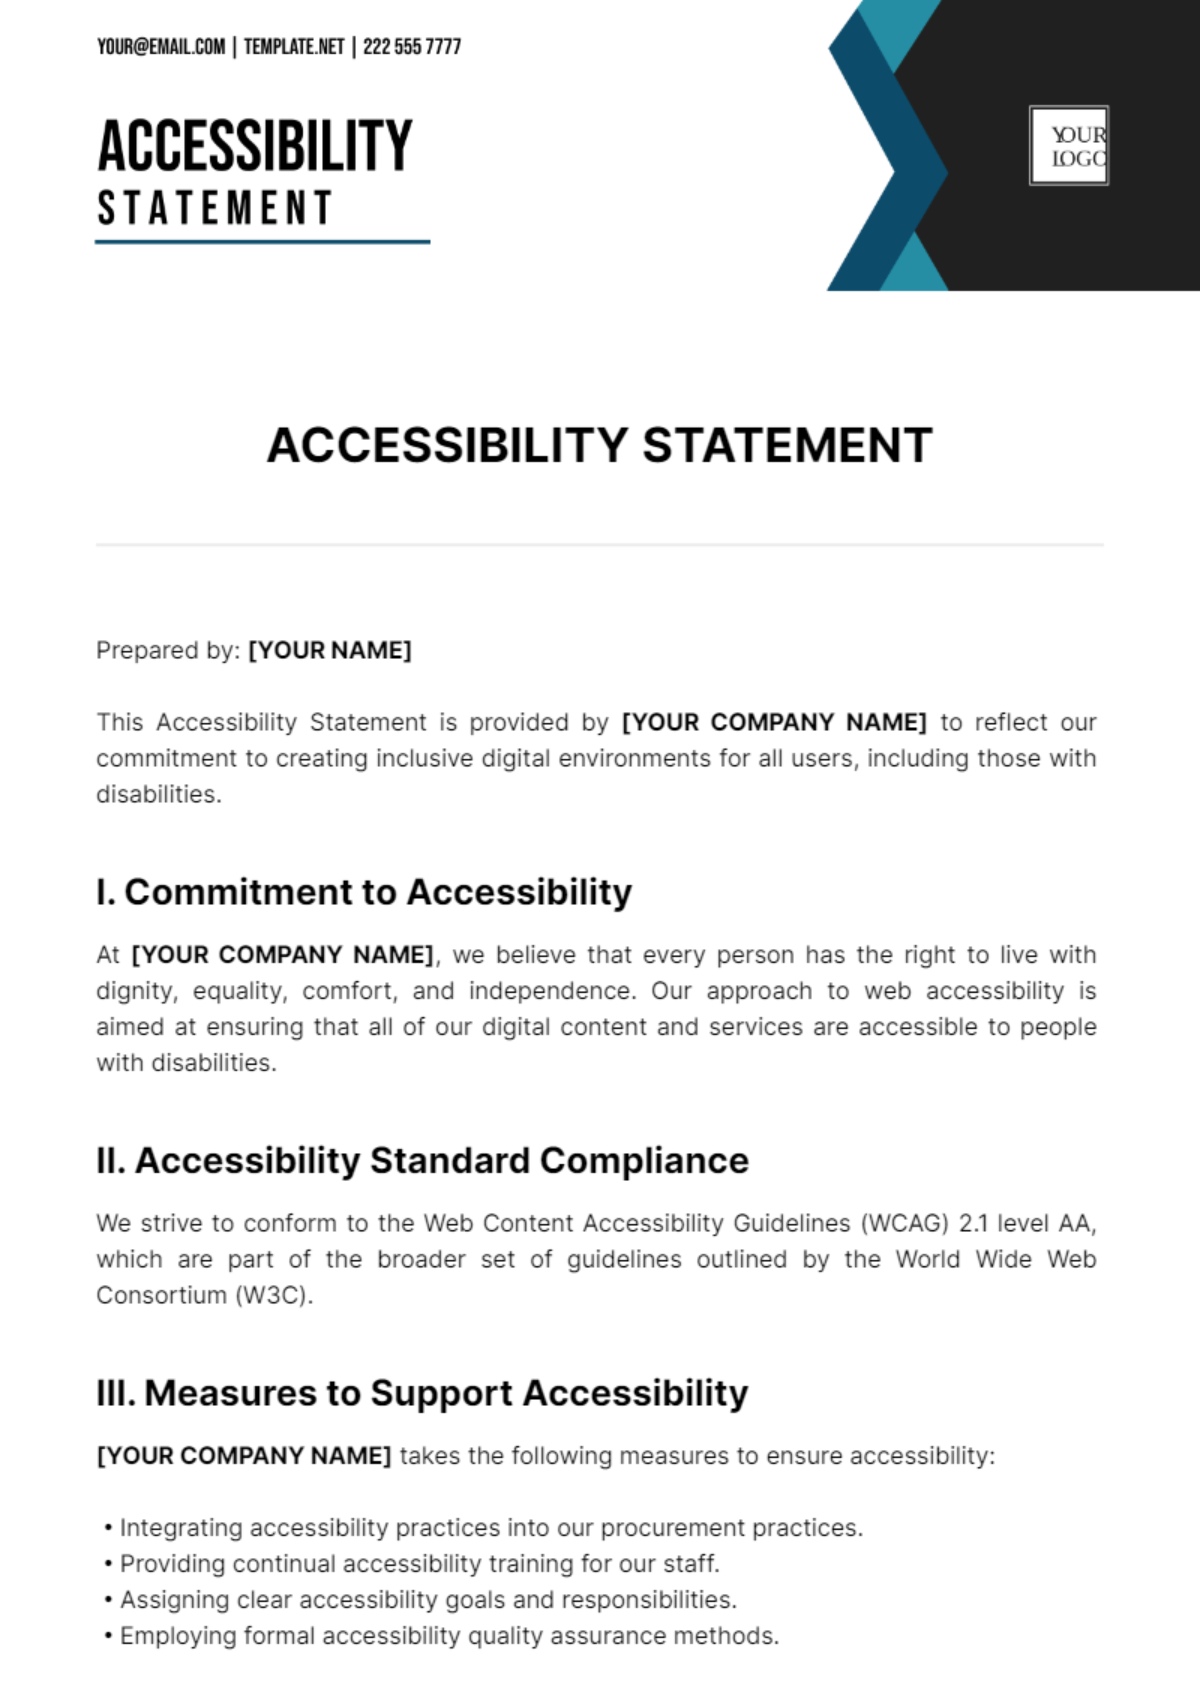 Accessibility Statement Template